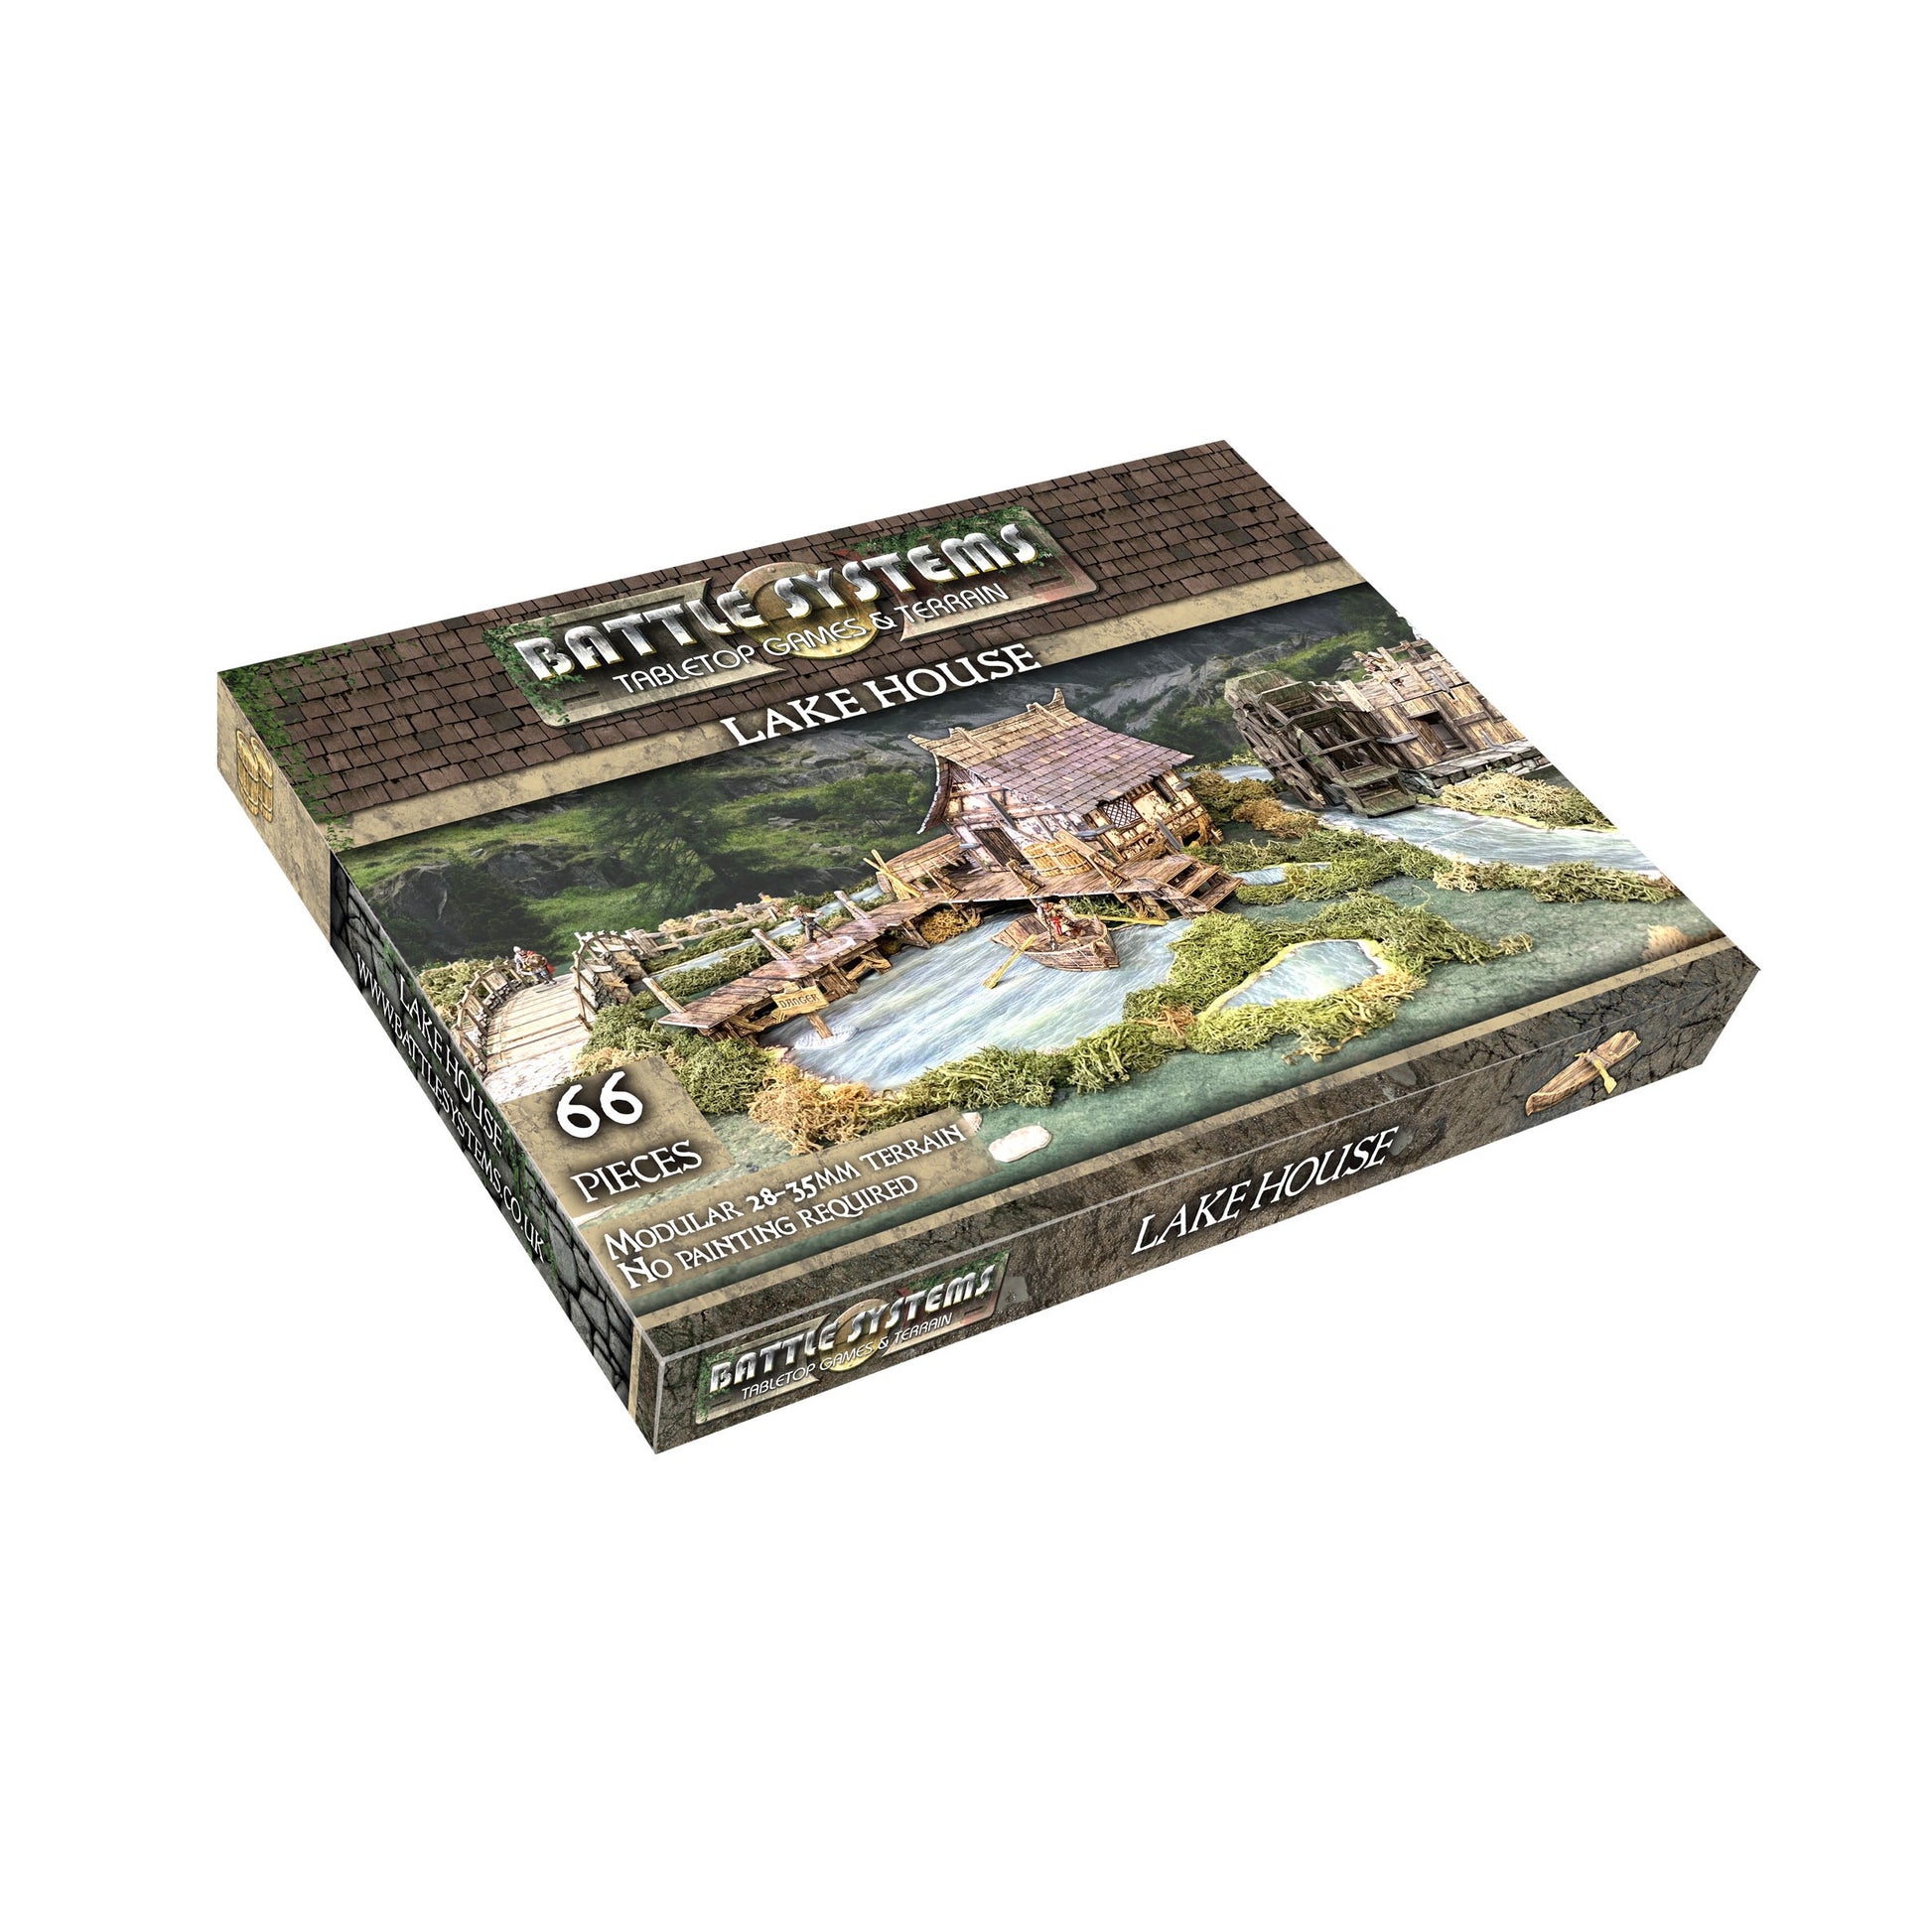 Battle Systems - Fantasy Wargames - Add-Ons - Lake House